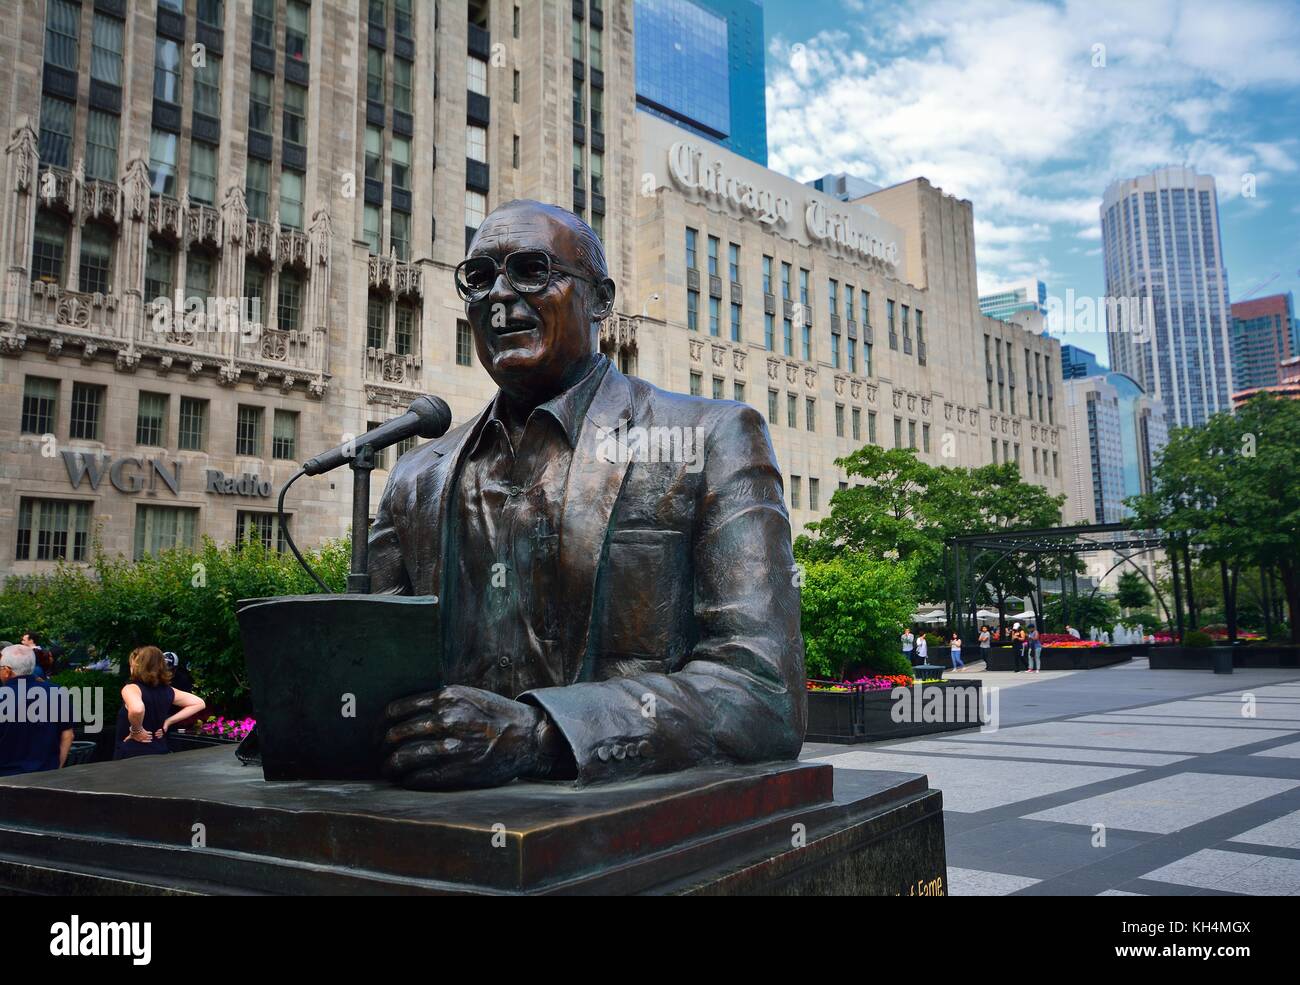 Chicago, Illinois - July 15, 2017: Statue of legendary Chicago broadcaster Jack Brickhouse in Pioneer Court along Michigan Ave Bridge in Chicago, IL,  Stock Photo